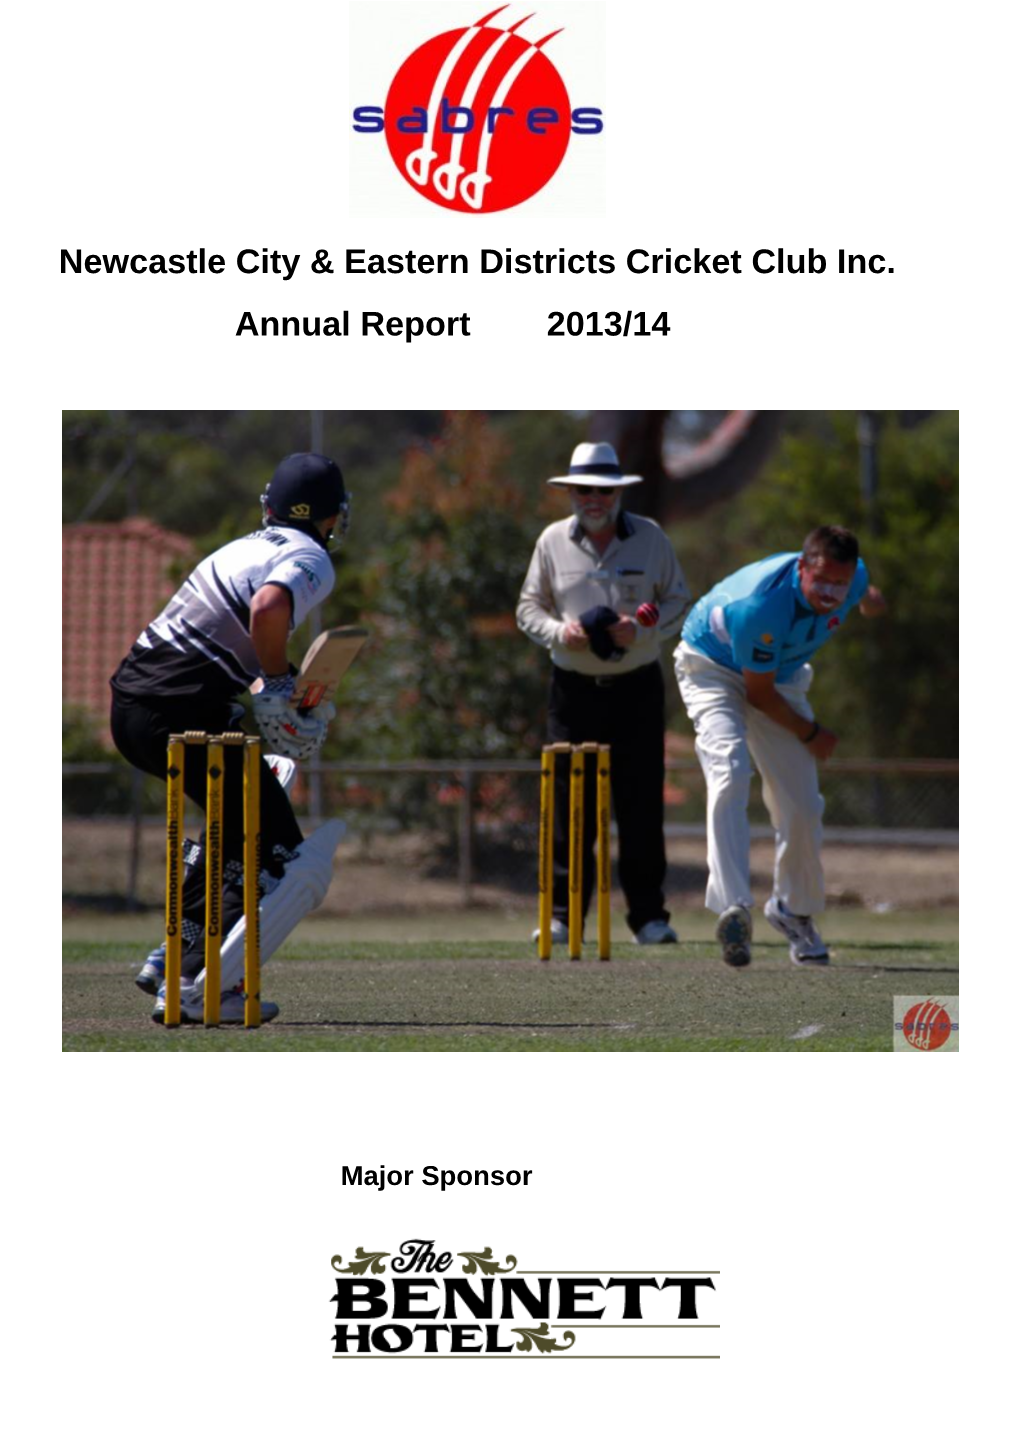 Newcastle City & Eastern Districts Cricket Club Inc. Annual Report